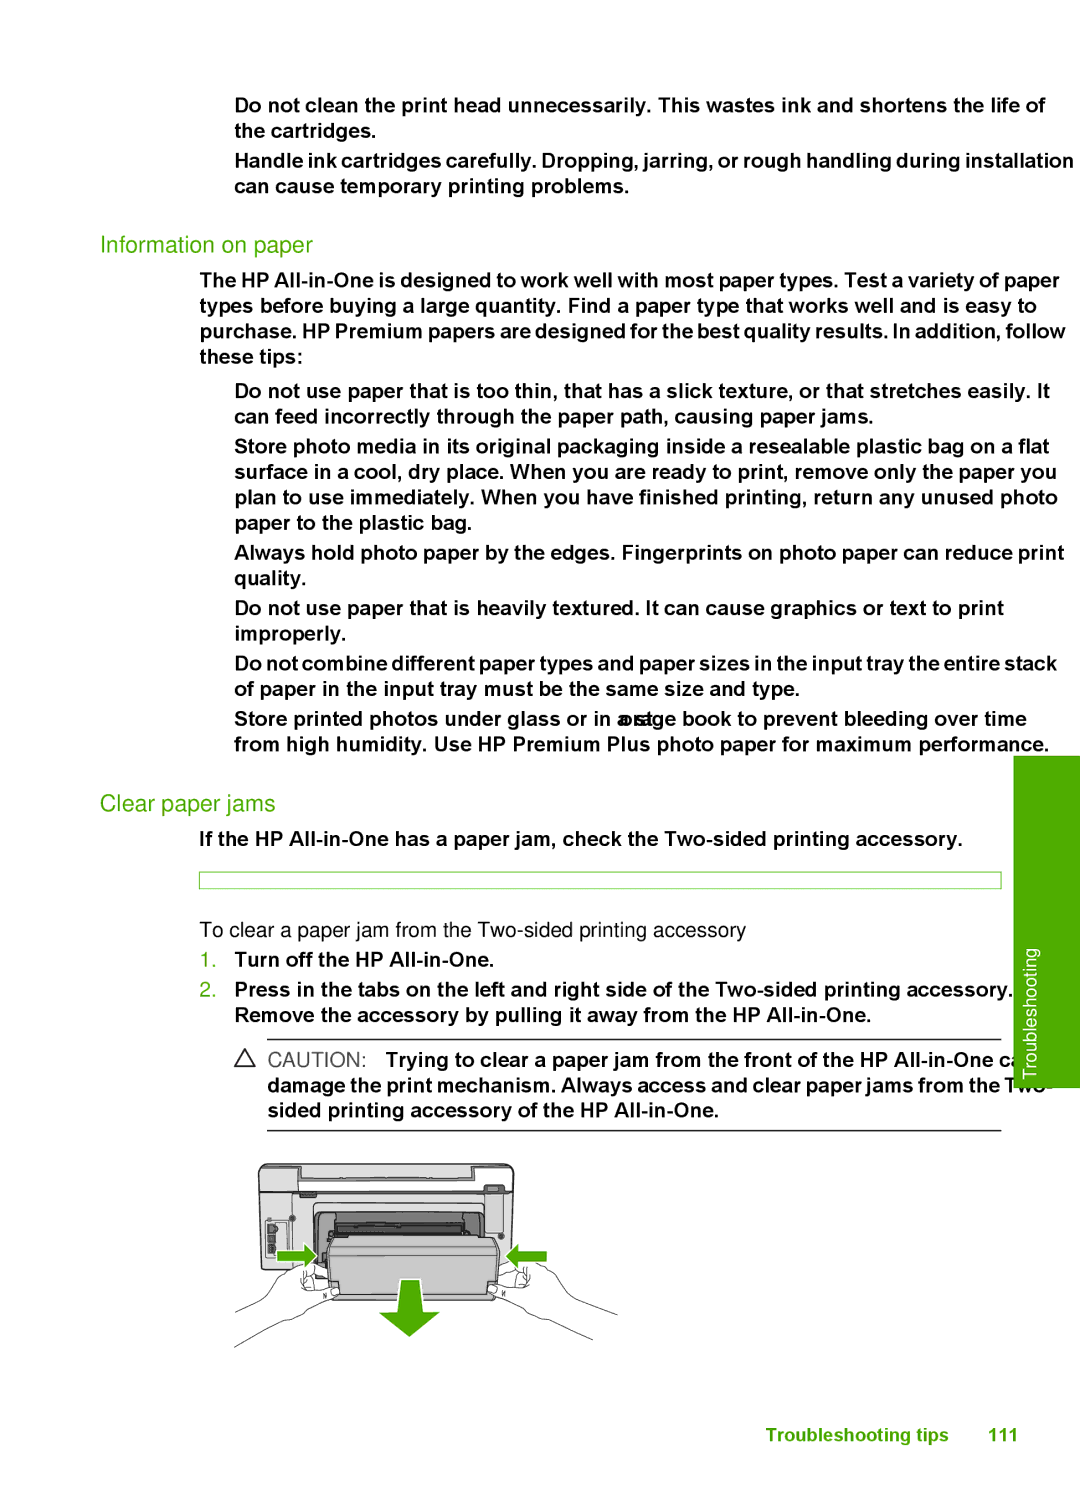 HP C6200 manual Information on paper, Clear paper jams, To clear a paper jam from the Two-sided printing accessory 